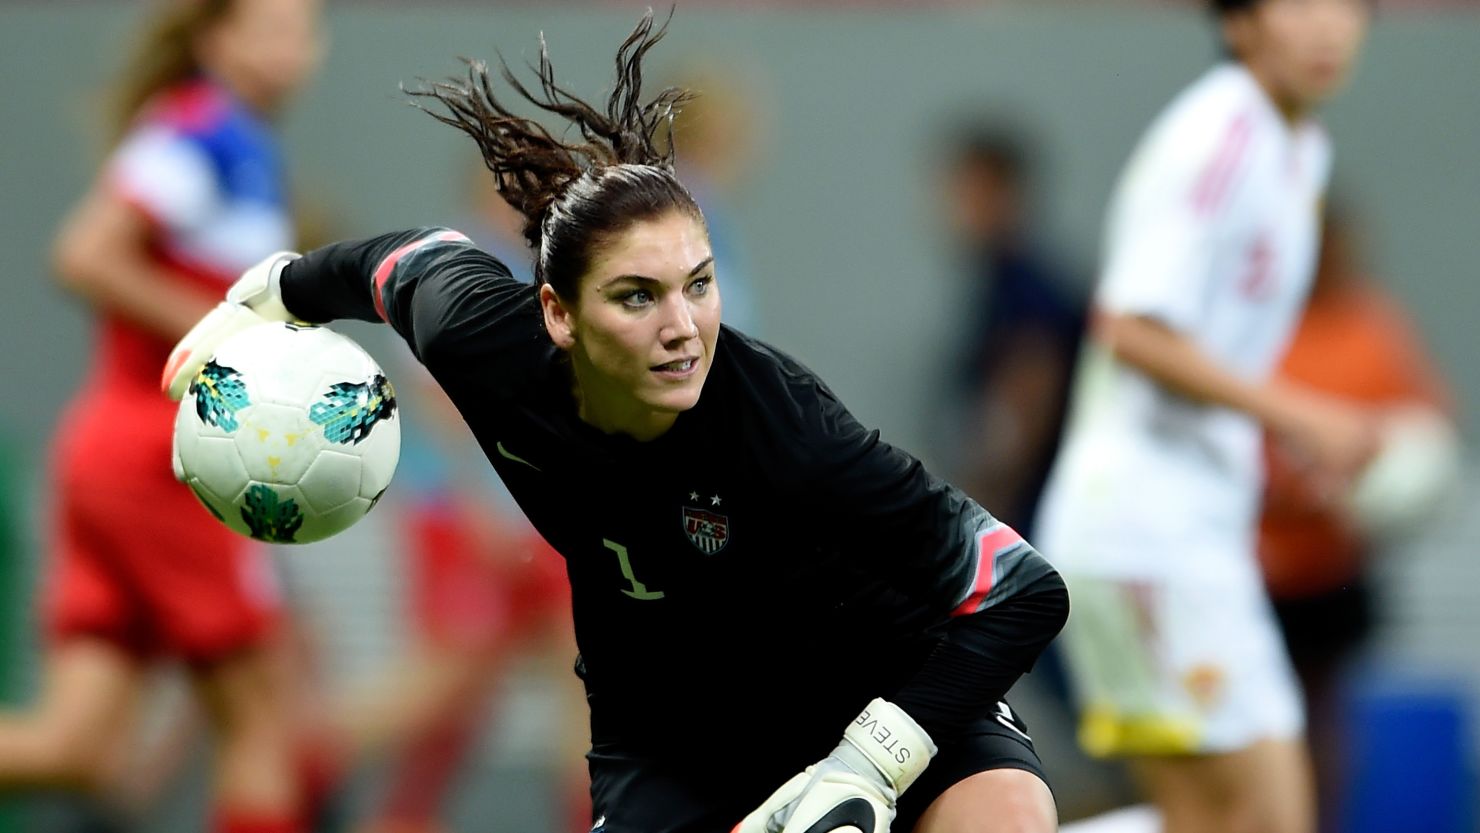 Goalkeeper Hope Solo in action for the US National Women's Team.